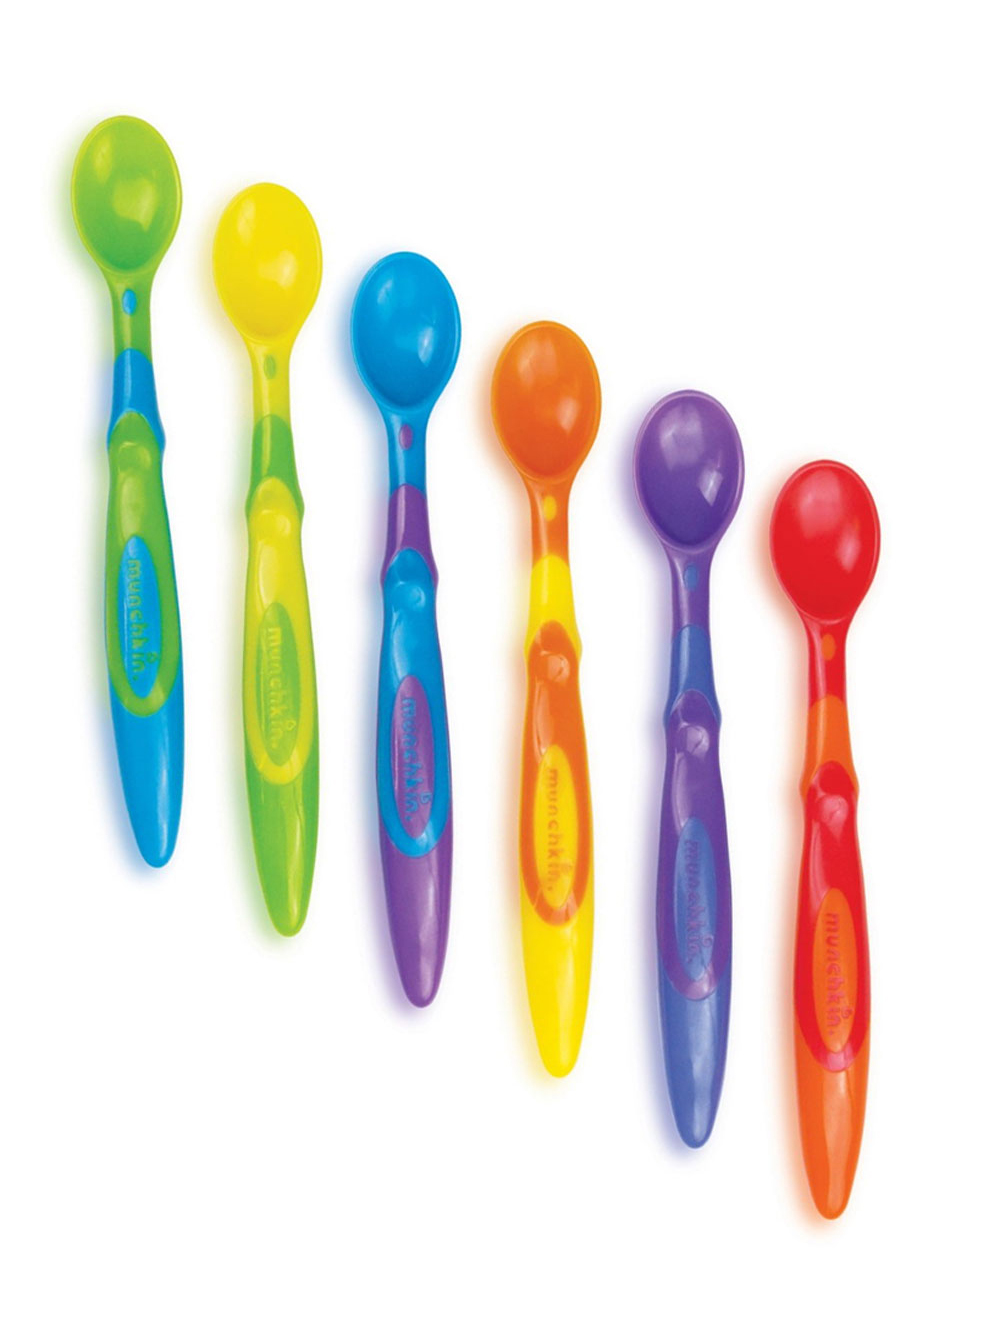 Munchkin Soft-Tip Infant Plastic colored spoons, 6 Pack 